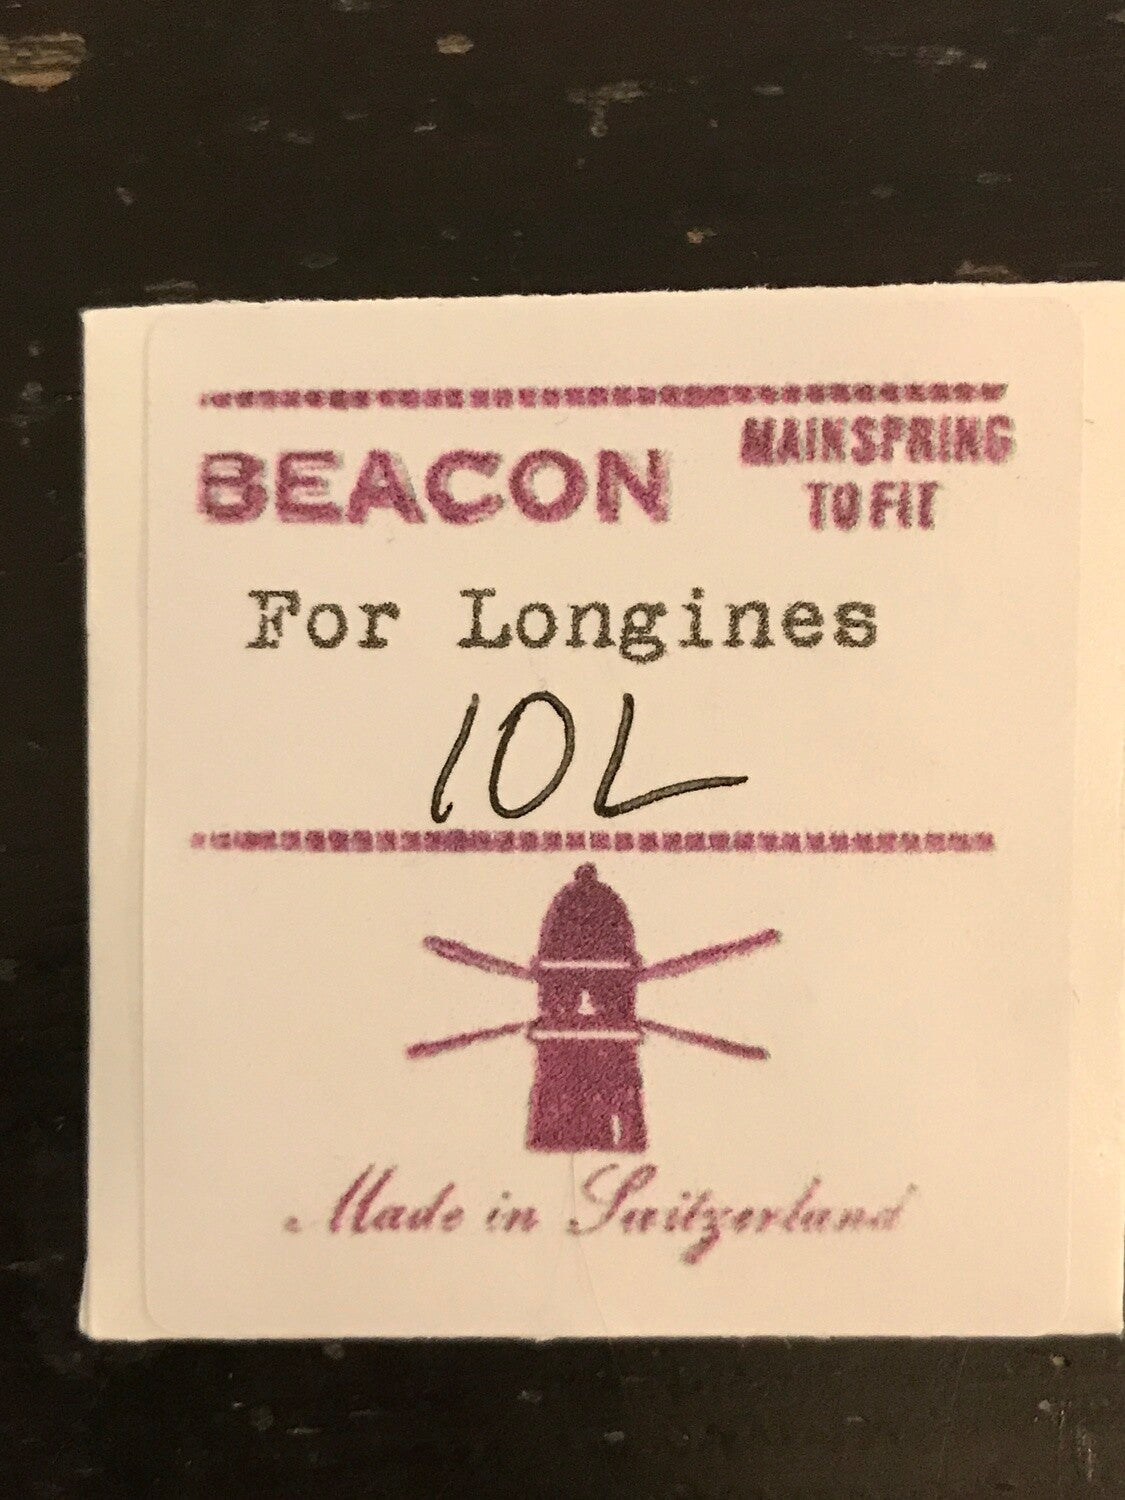 Beacon Mainspring for Longines caliber 10L movements - steel